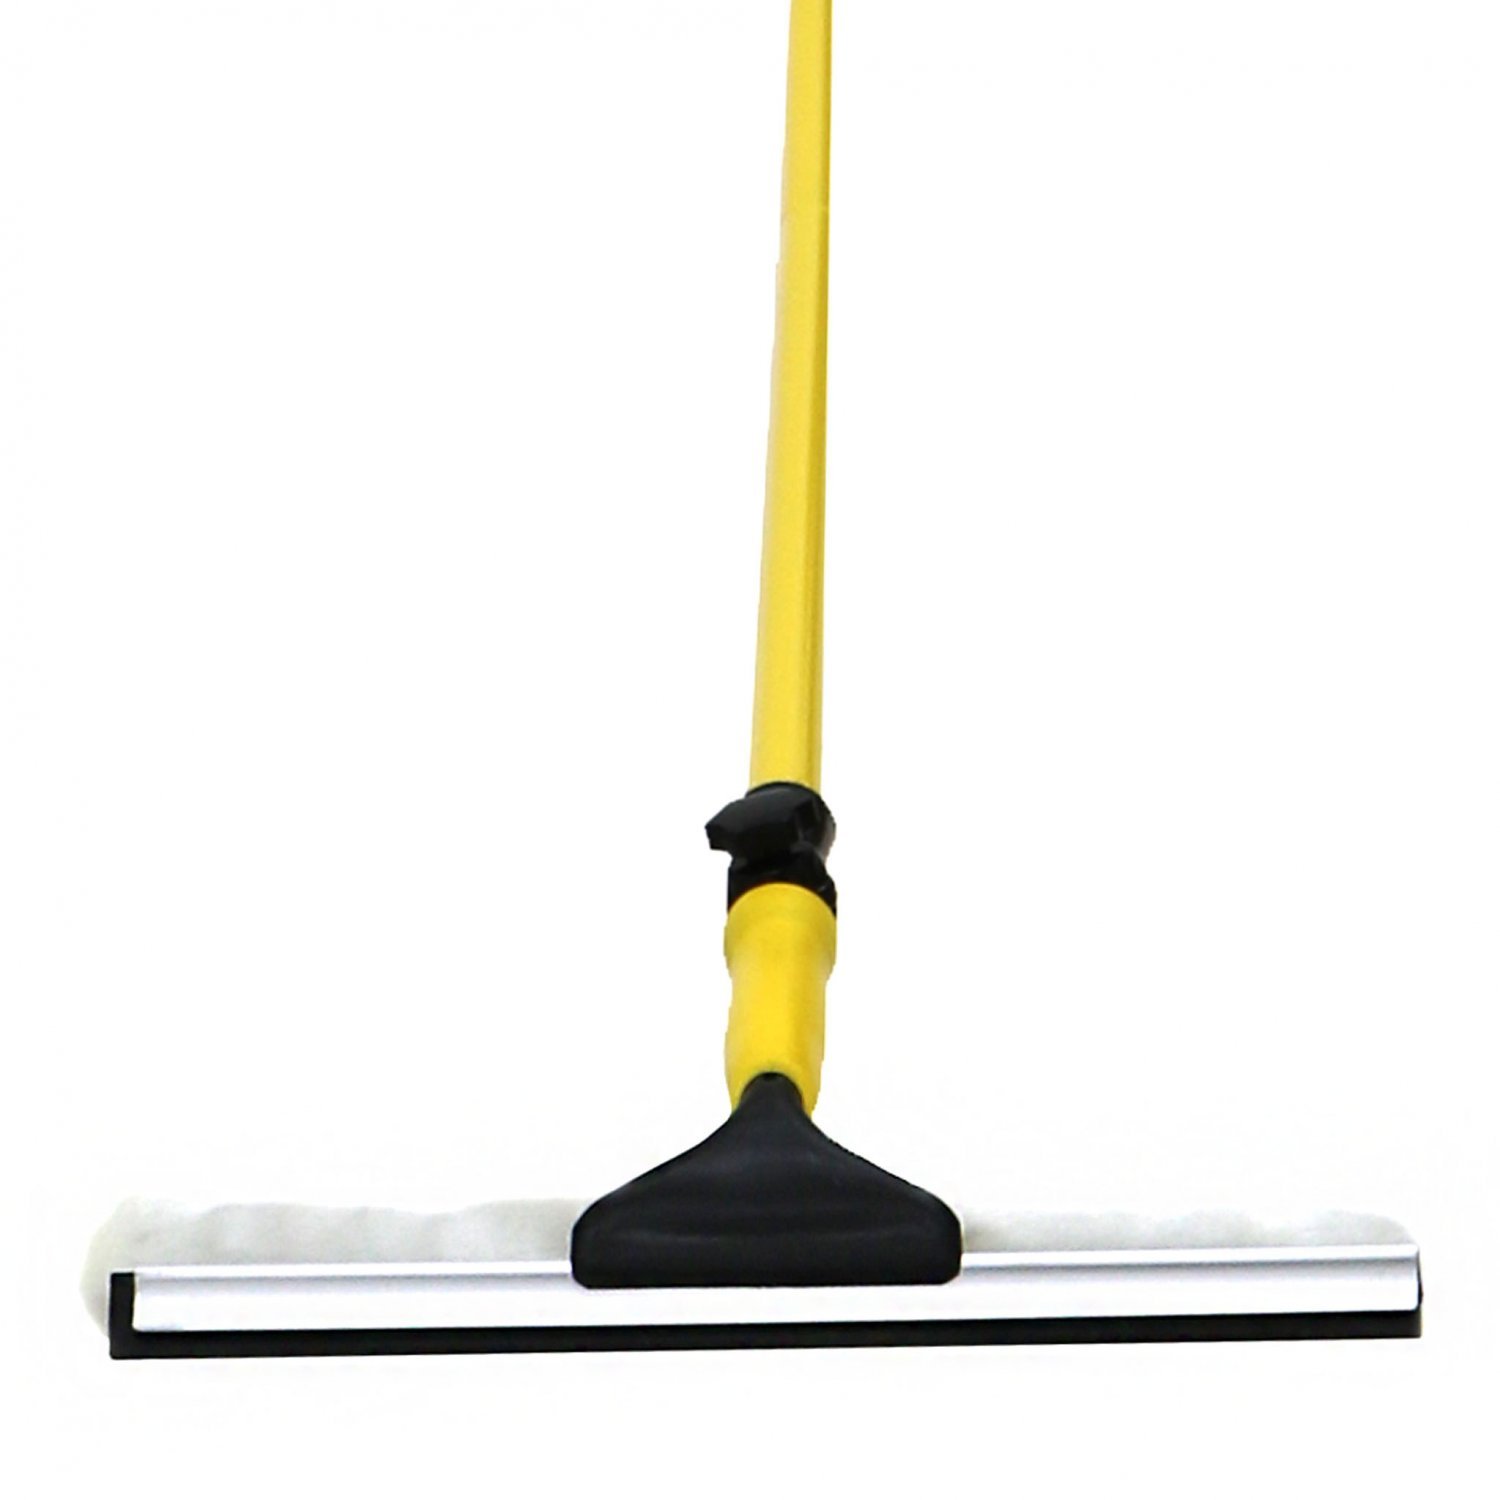 radius Often spoken Weaken Extendable 3.5m Window Cleaning Squeegee Mop Wash Wipe Cleaner - £14.99 :  Oypla - Stocking the very best in Toys, Electrical, Furniture, Homeware,  Garden, Gifts and much more!